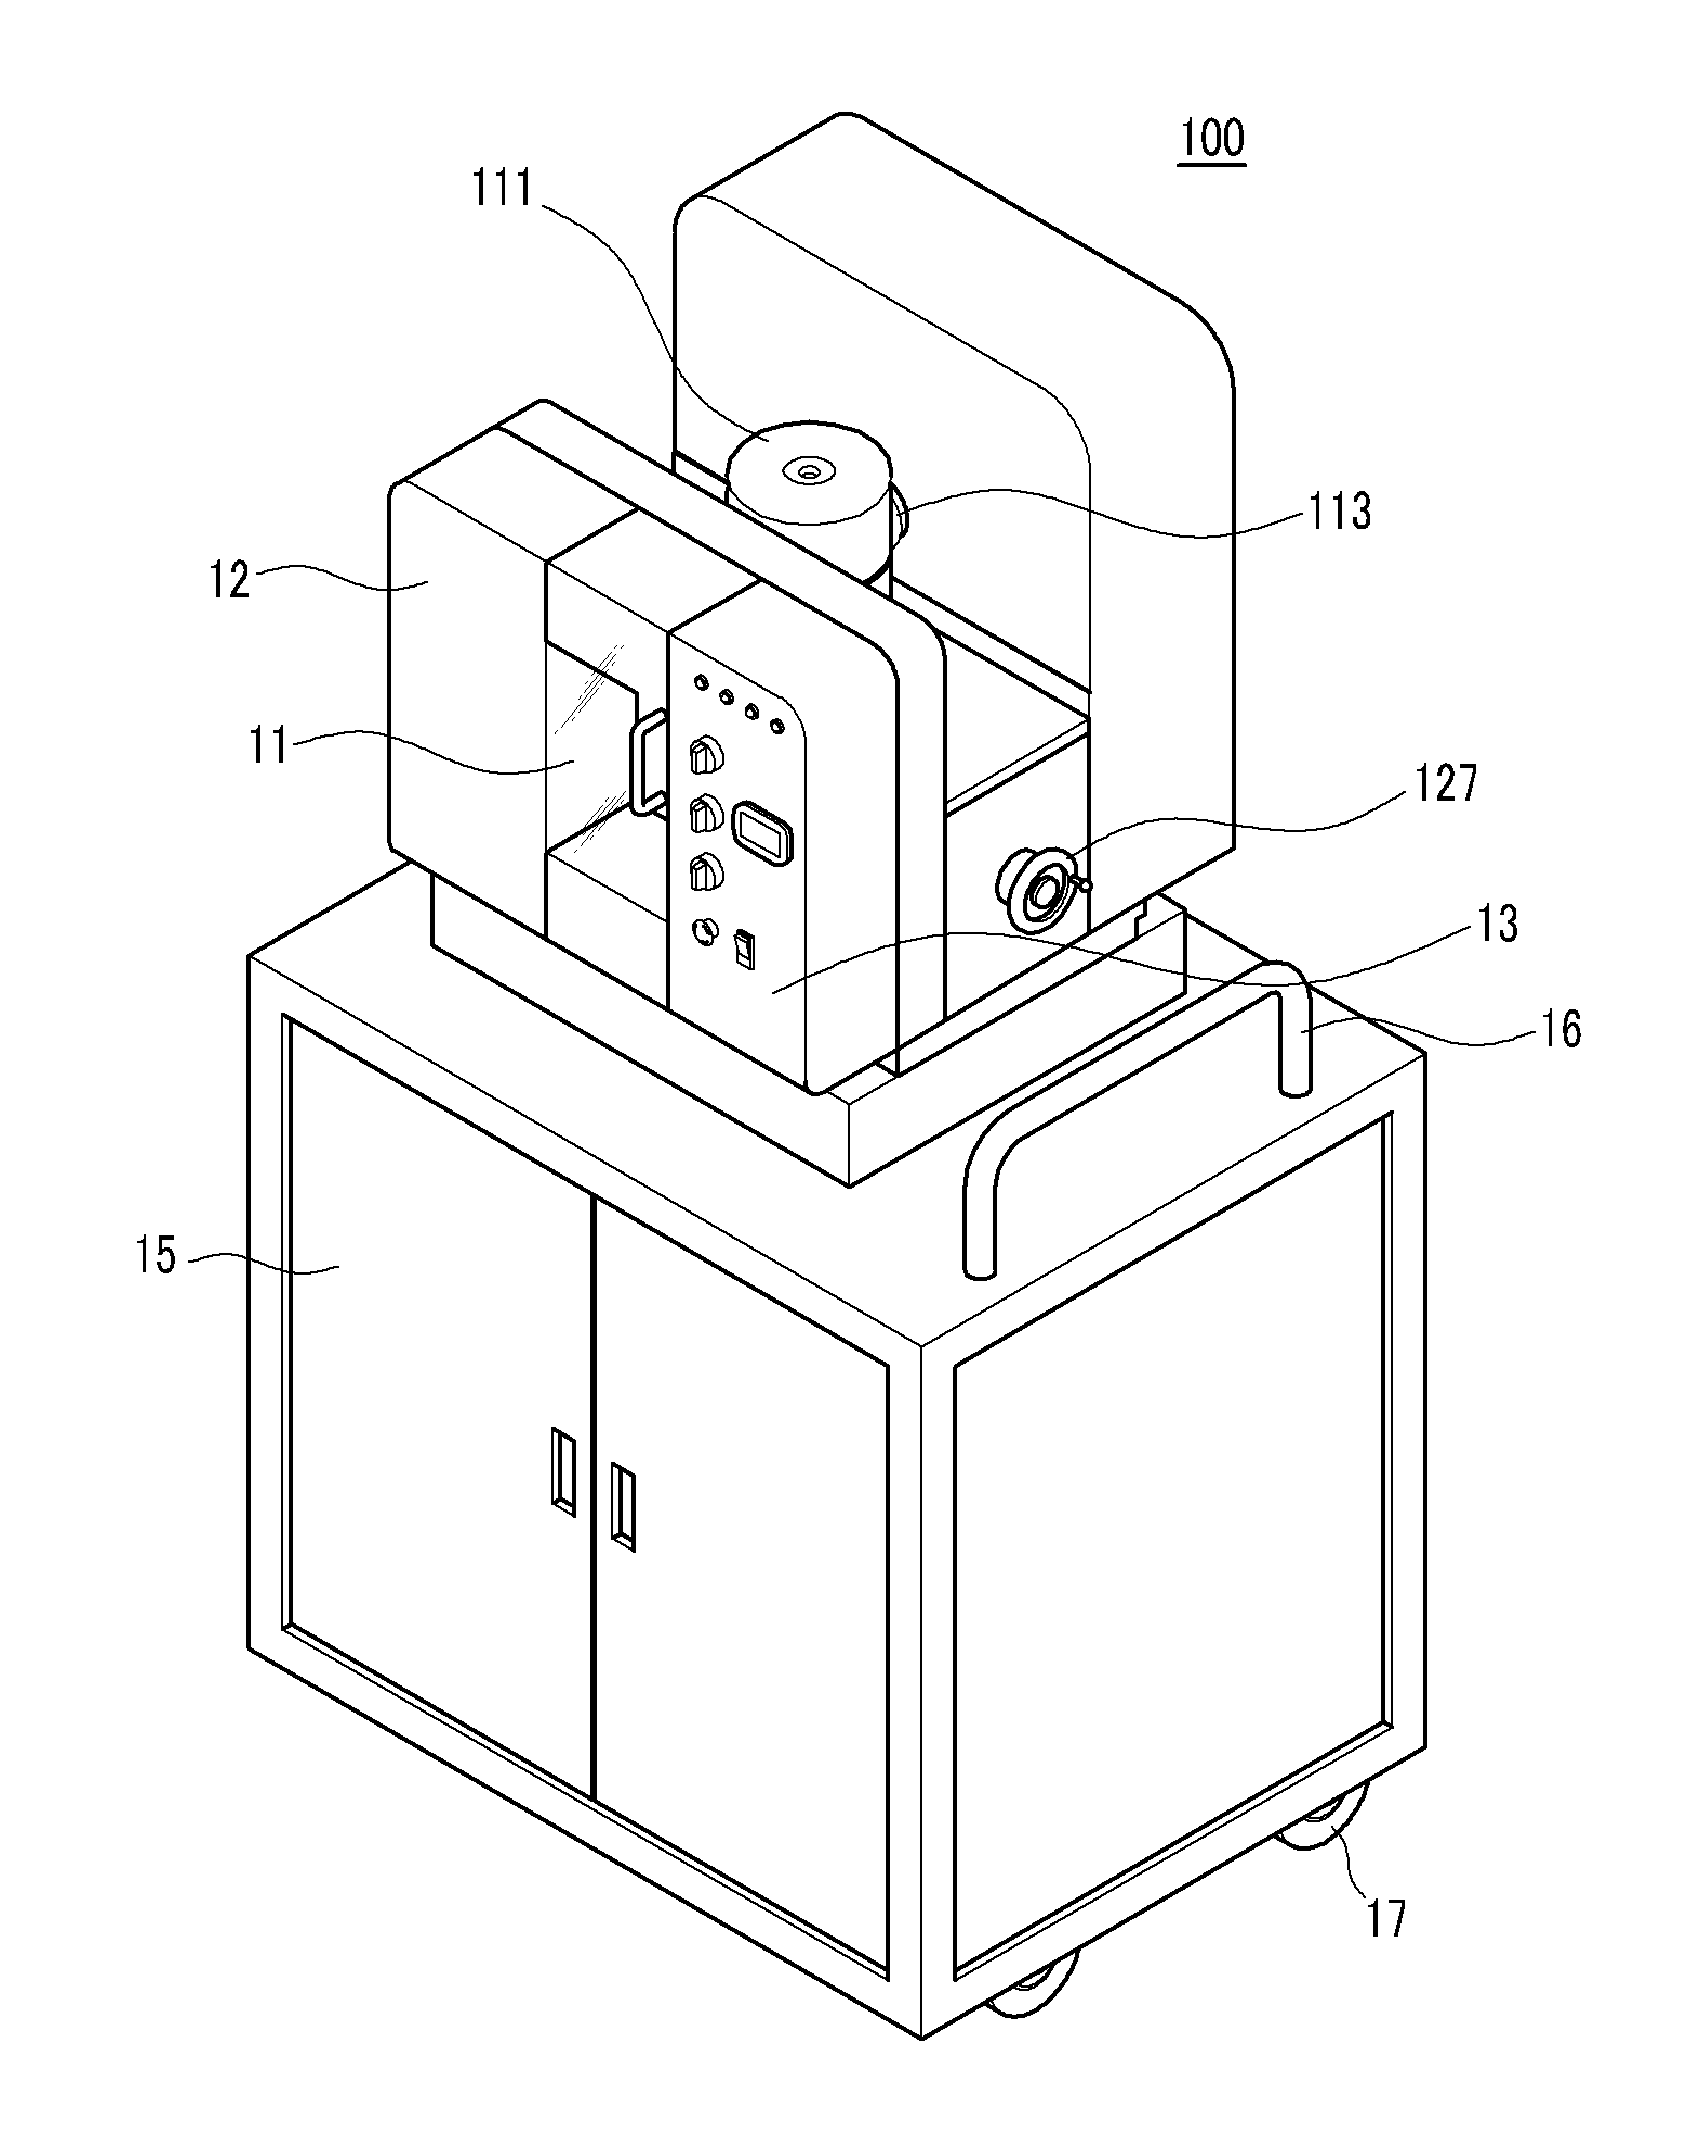 System for dispensing radio-pharmaceuticals and measuring radiation dosage of it